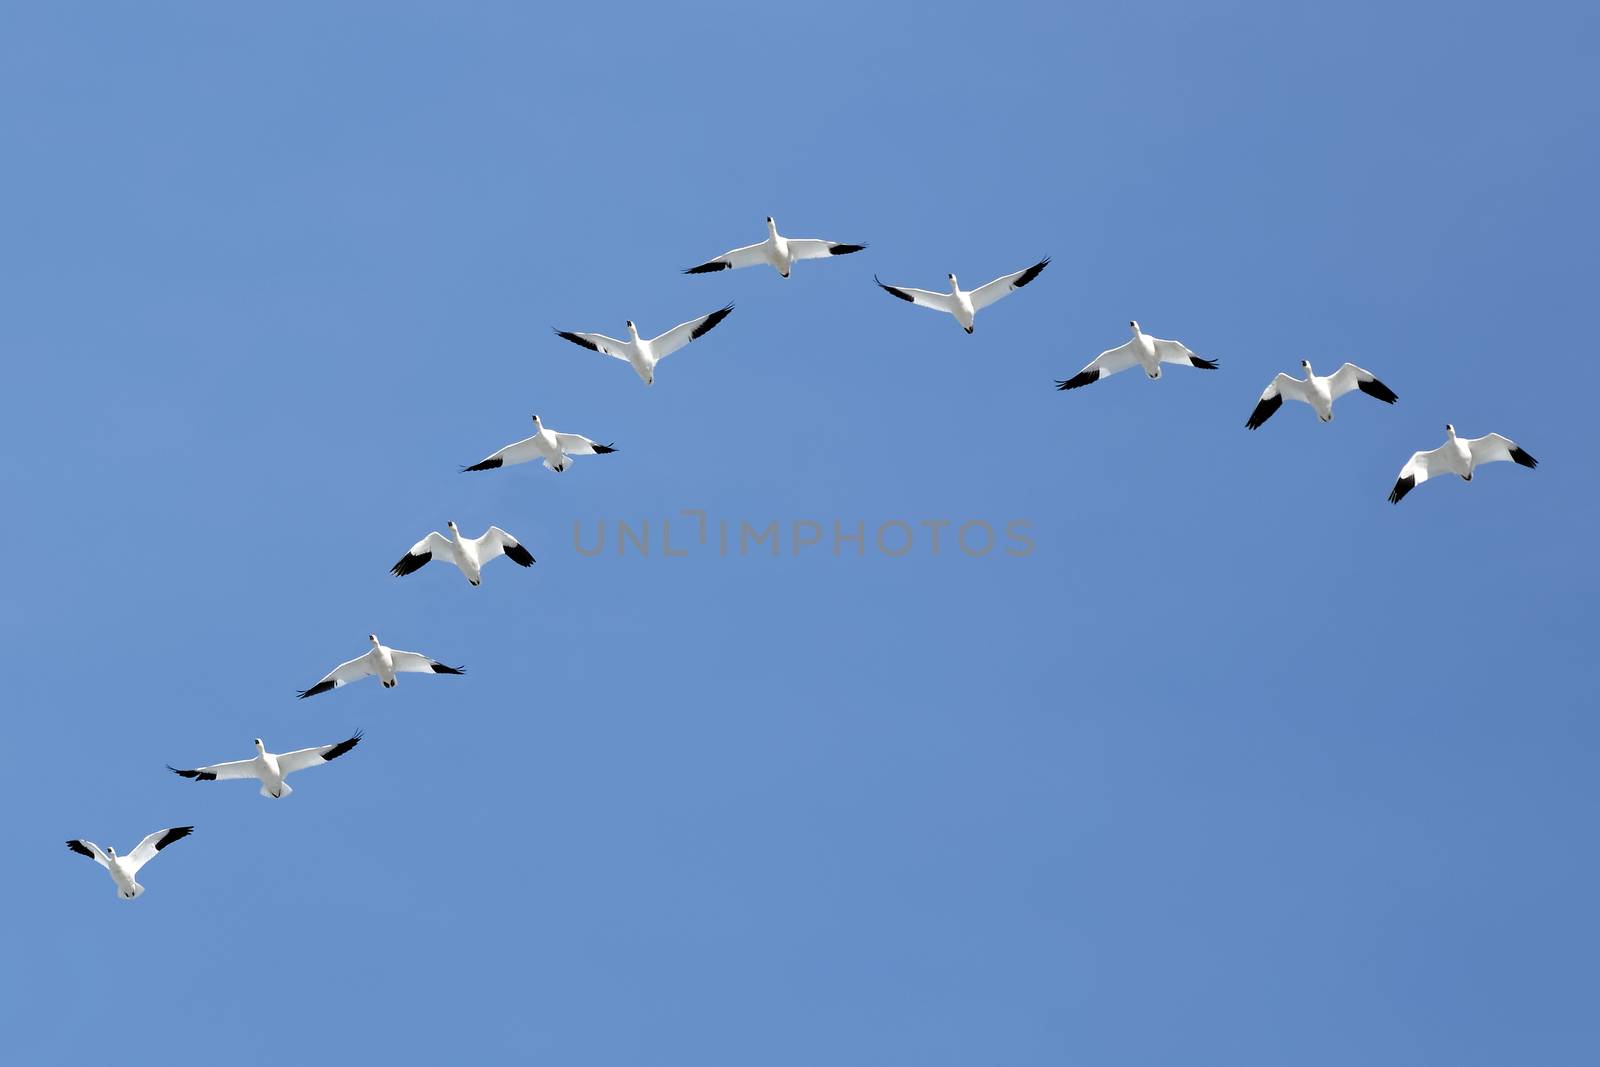 Migrating Snow Geese flying in a V formation across a blue sky.